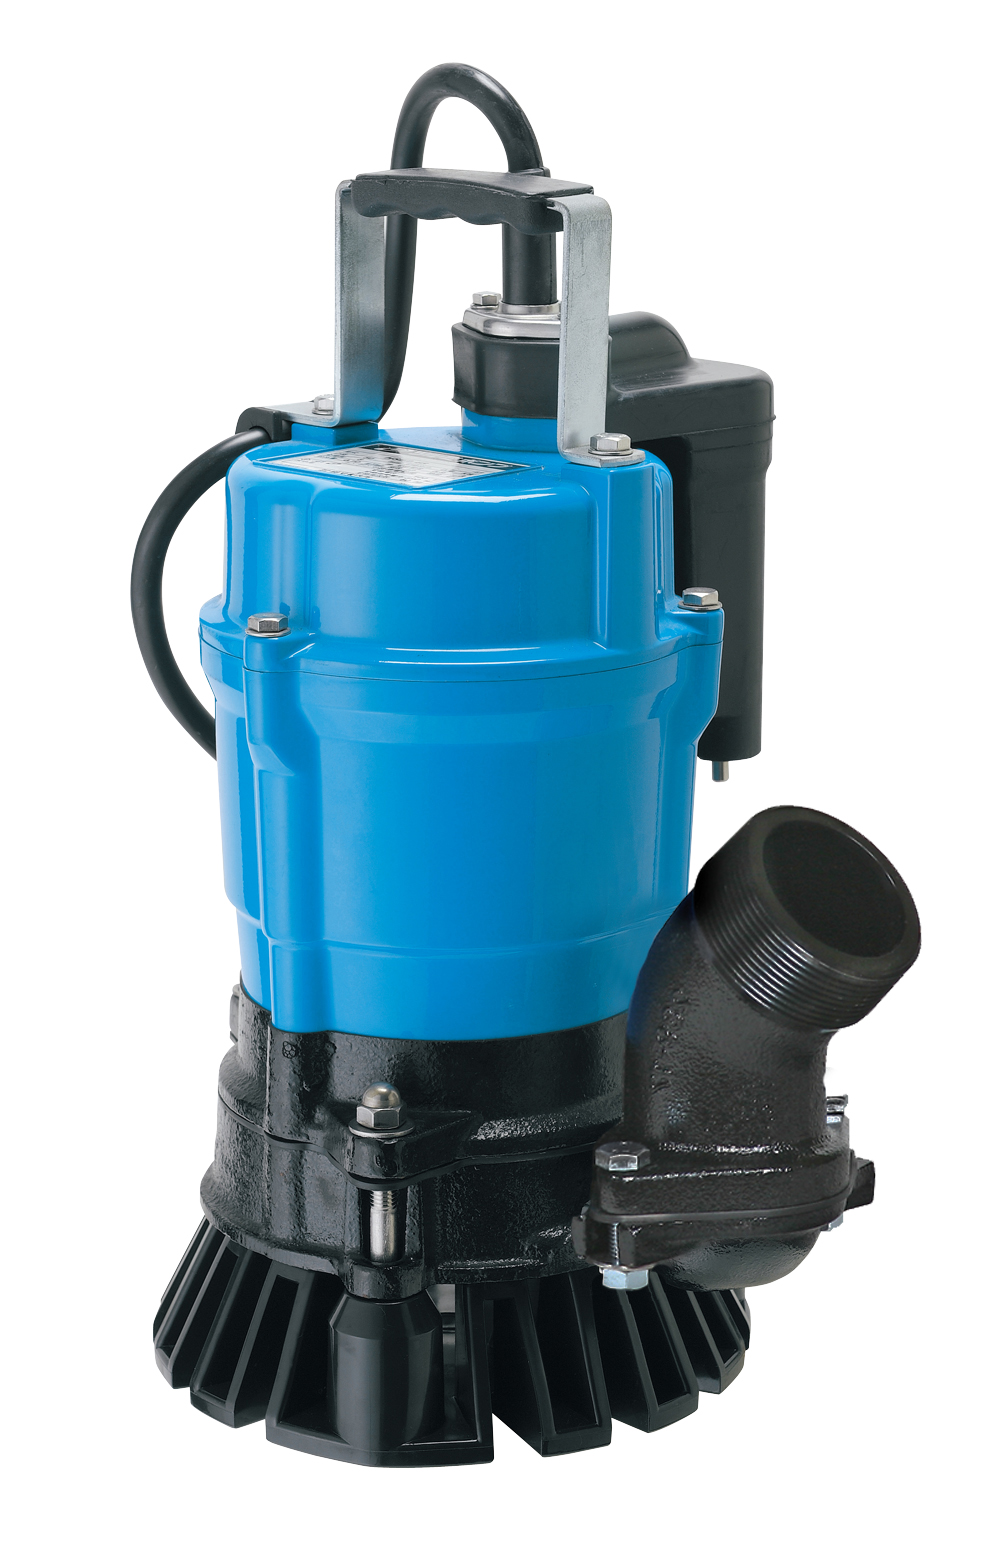 Tsurumi Pump has added the HSE2.4S to its HS series.